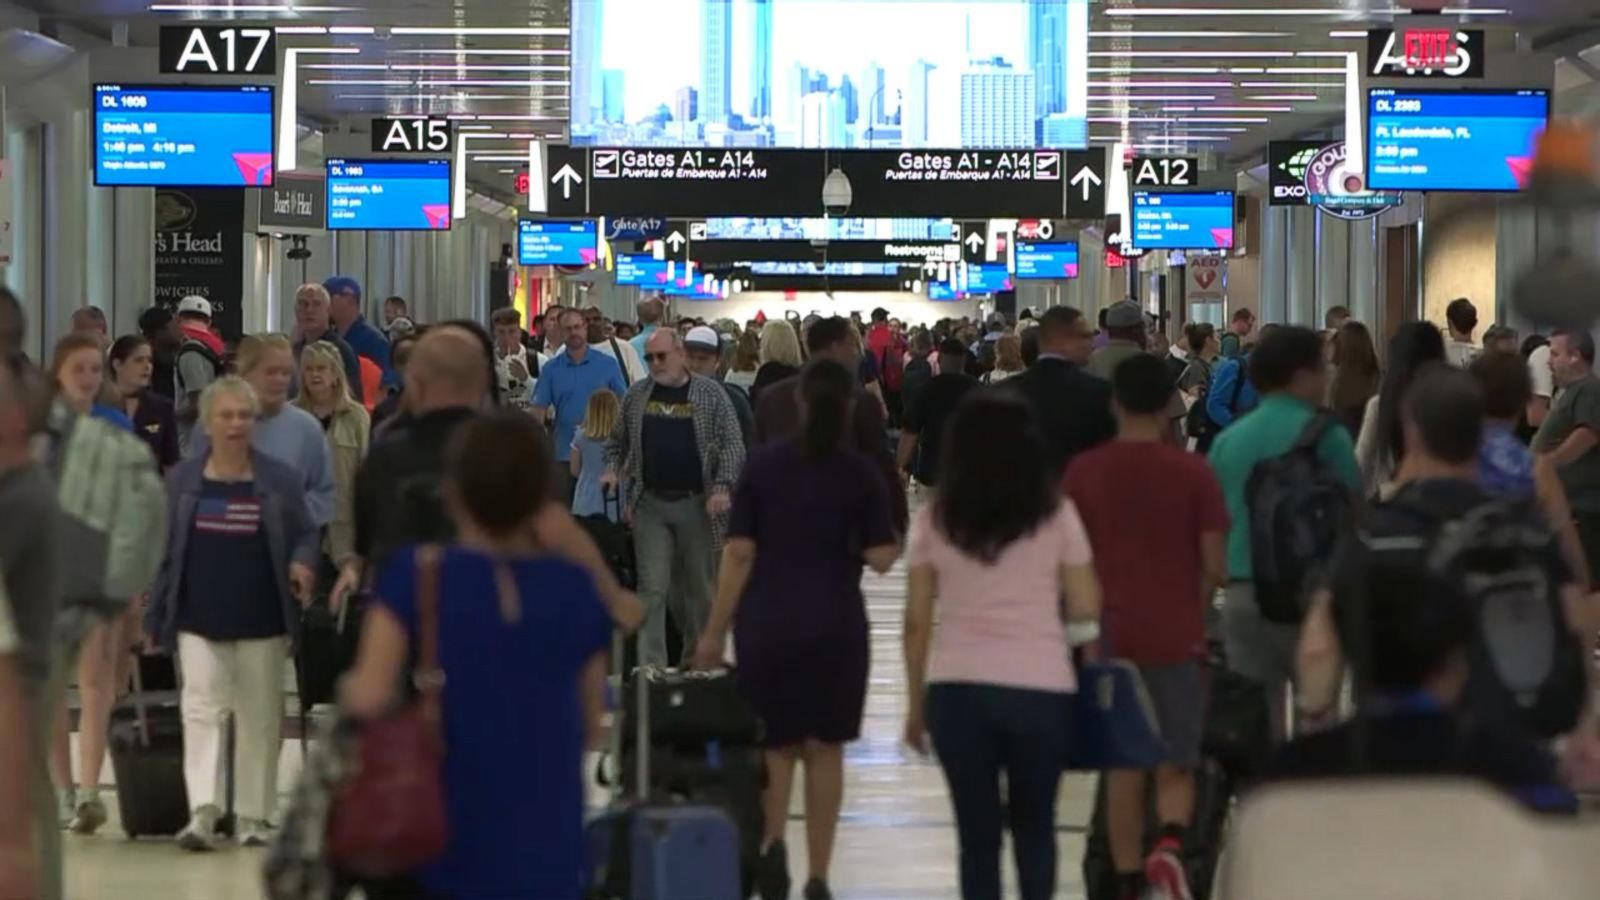 VIDEO: July 4th holiday brings busiest air travel day